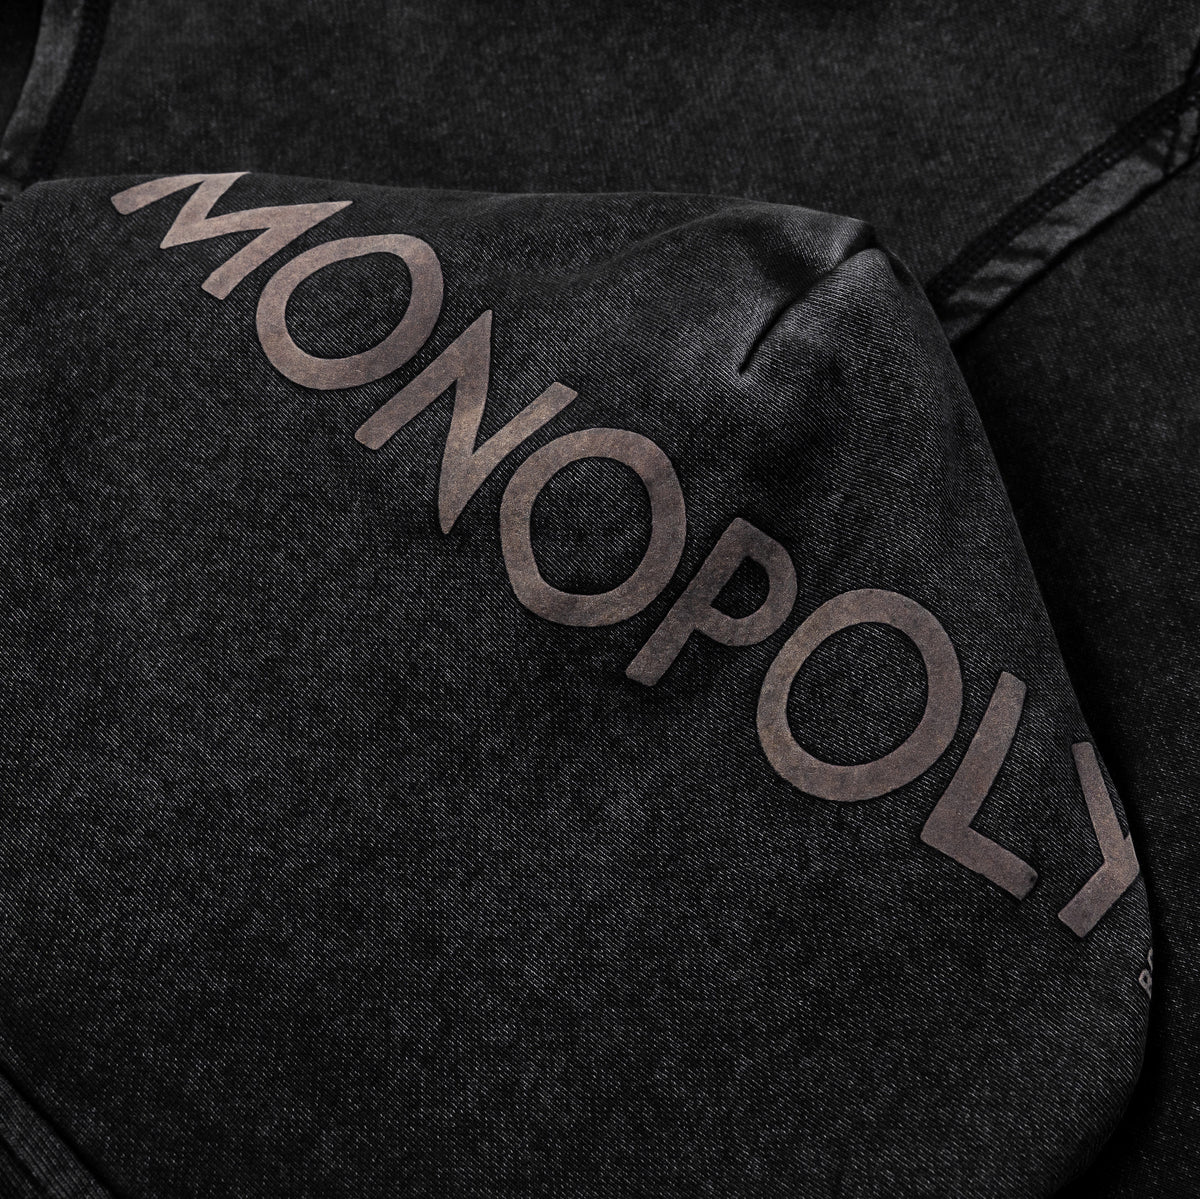 Shoe Palace SP x Monopoly Diamond Pullover Mens Hoodie Black Taupe ...